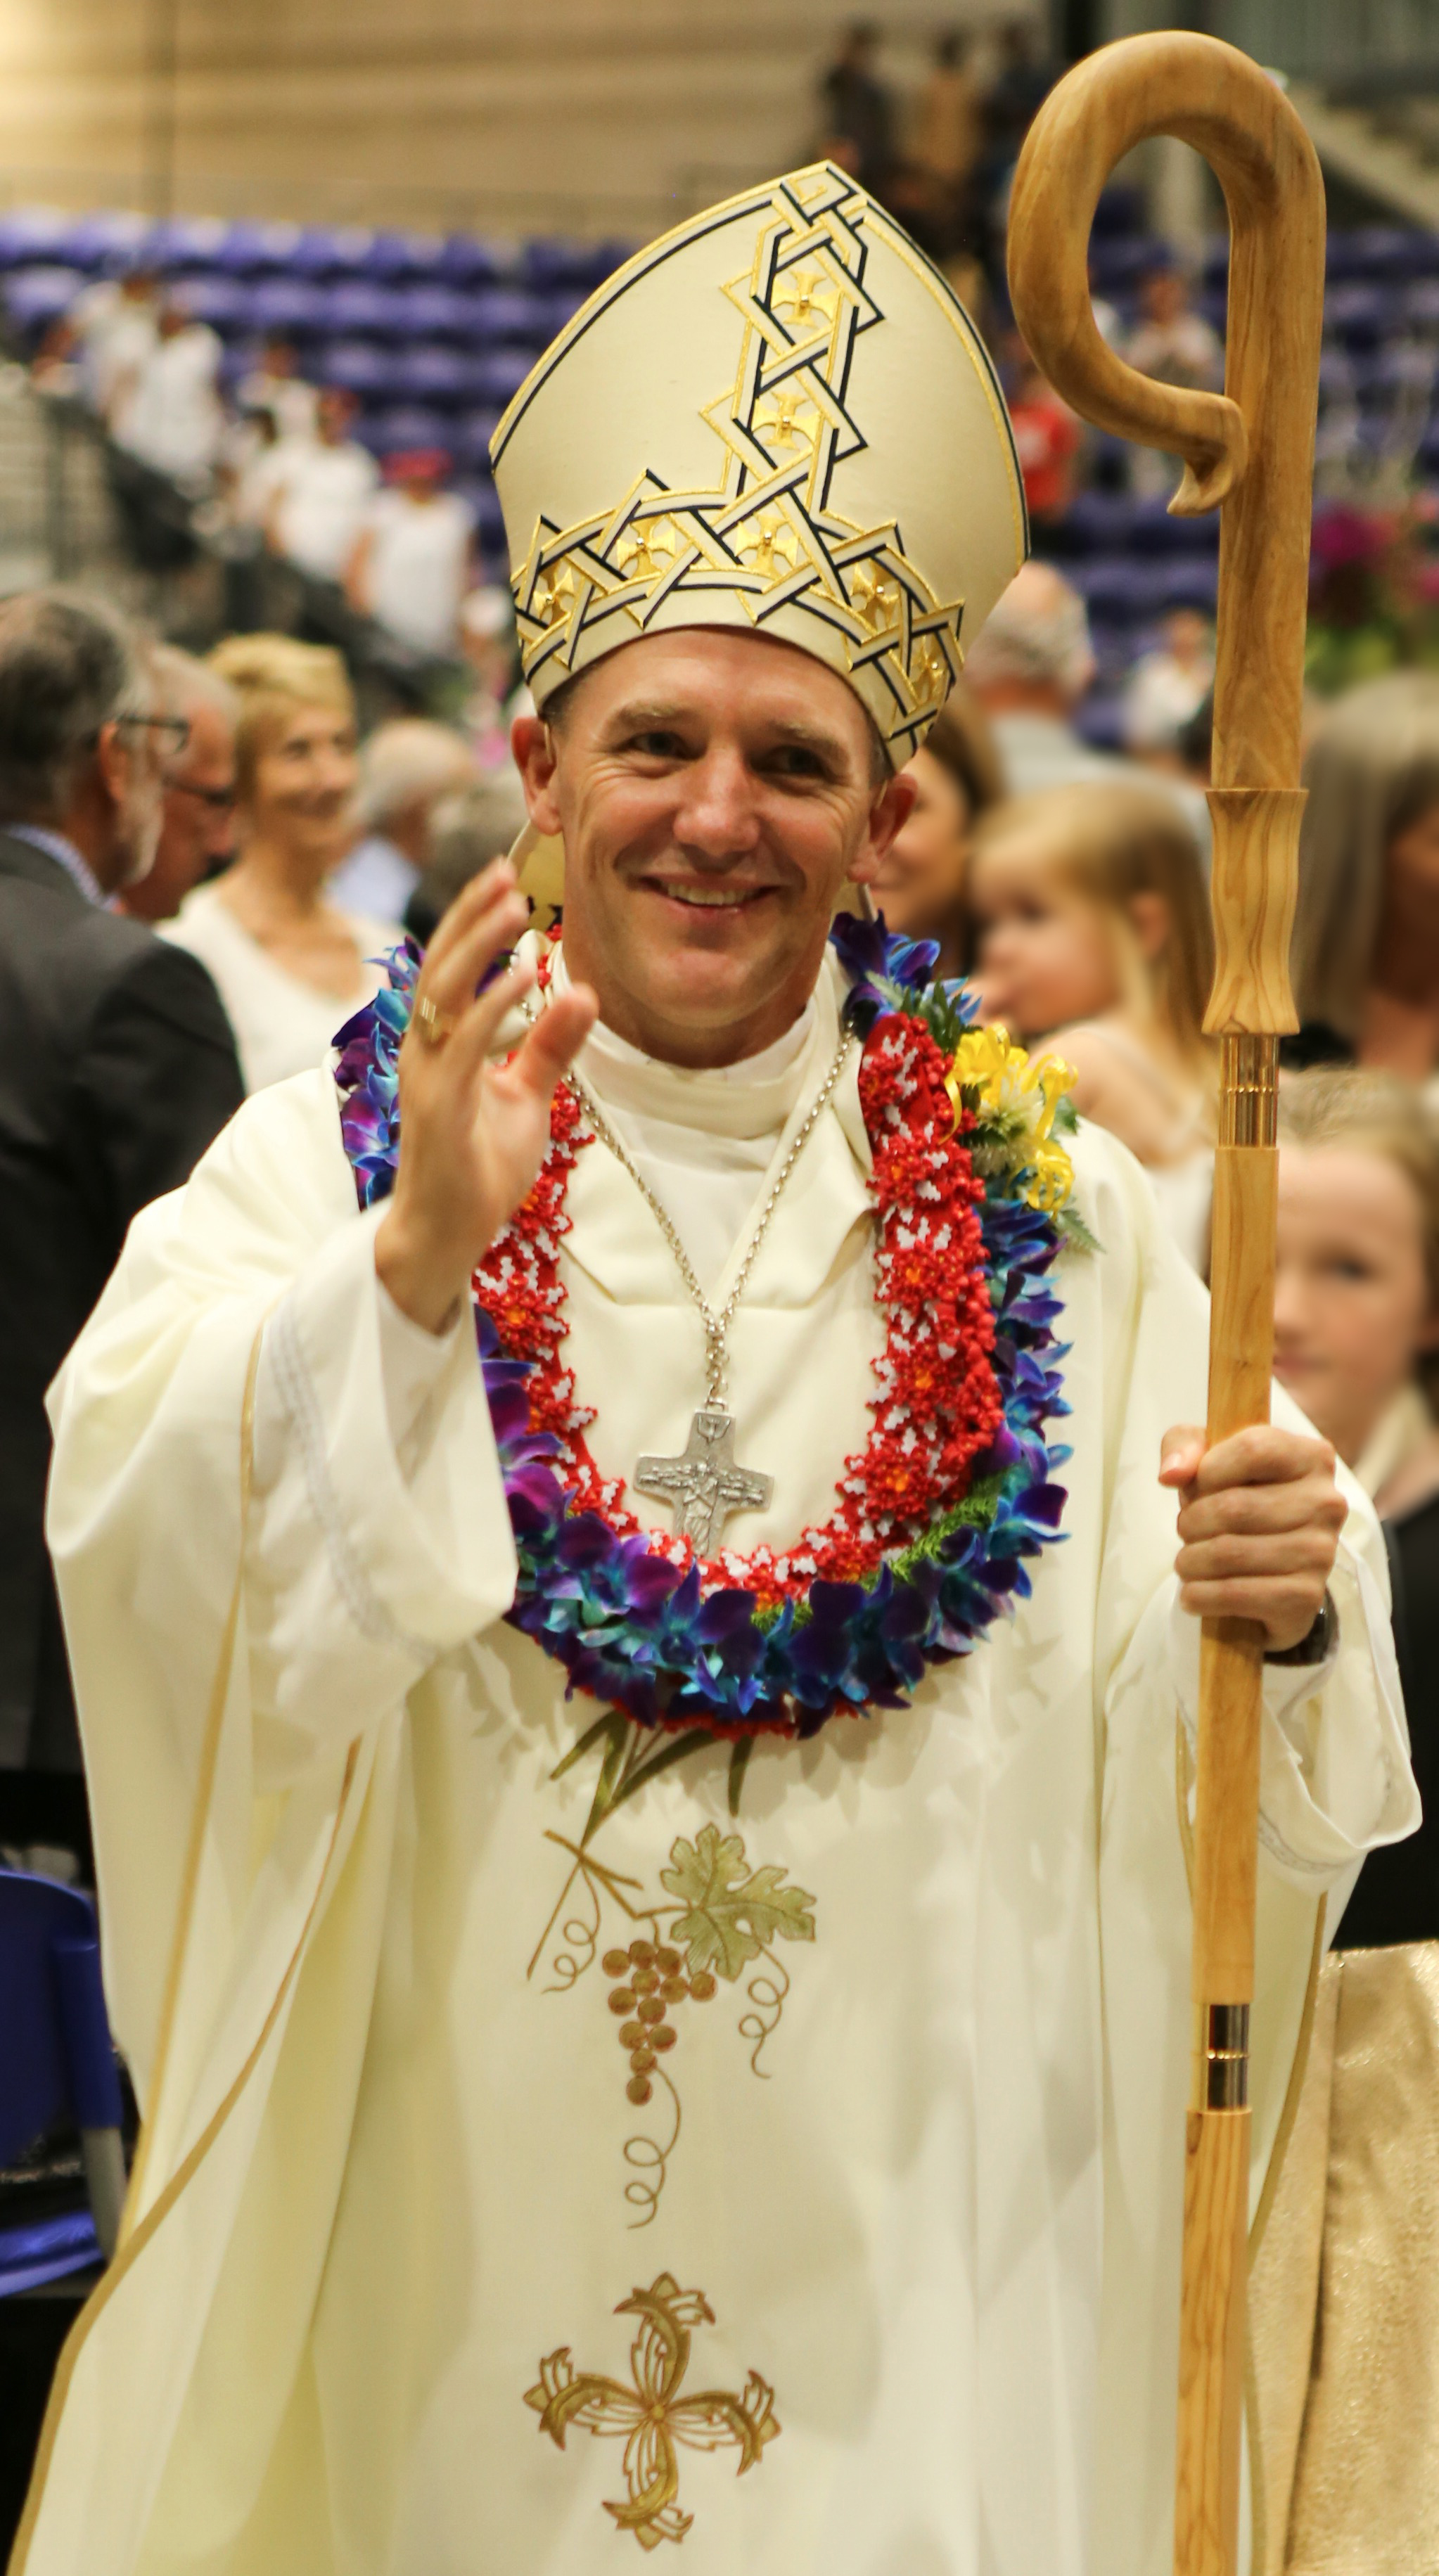 Bishop Michael at his Episcopal Ordination in 2020